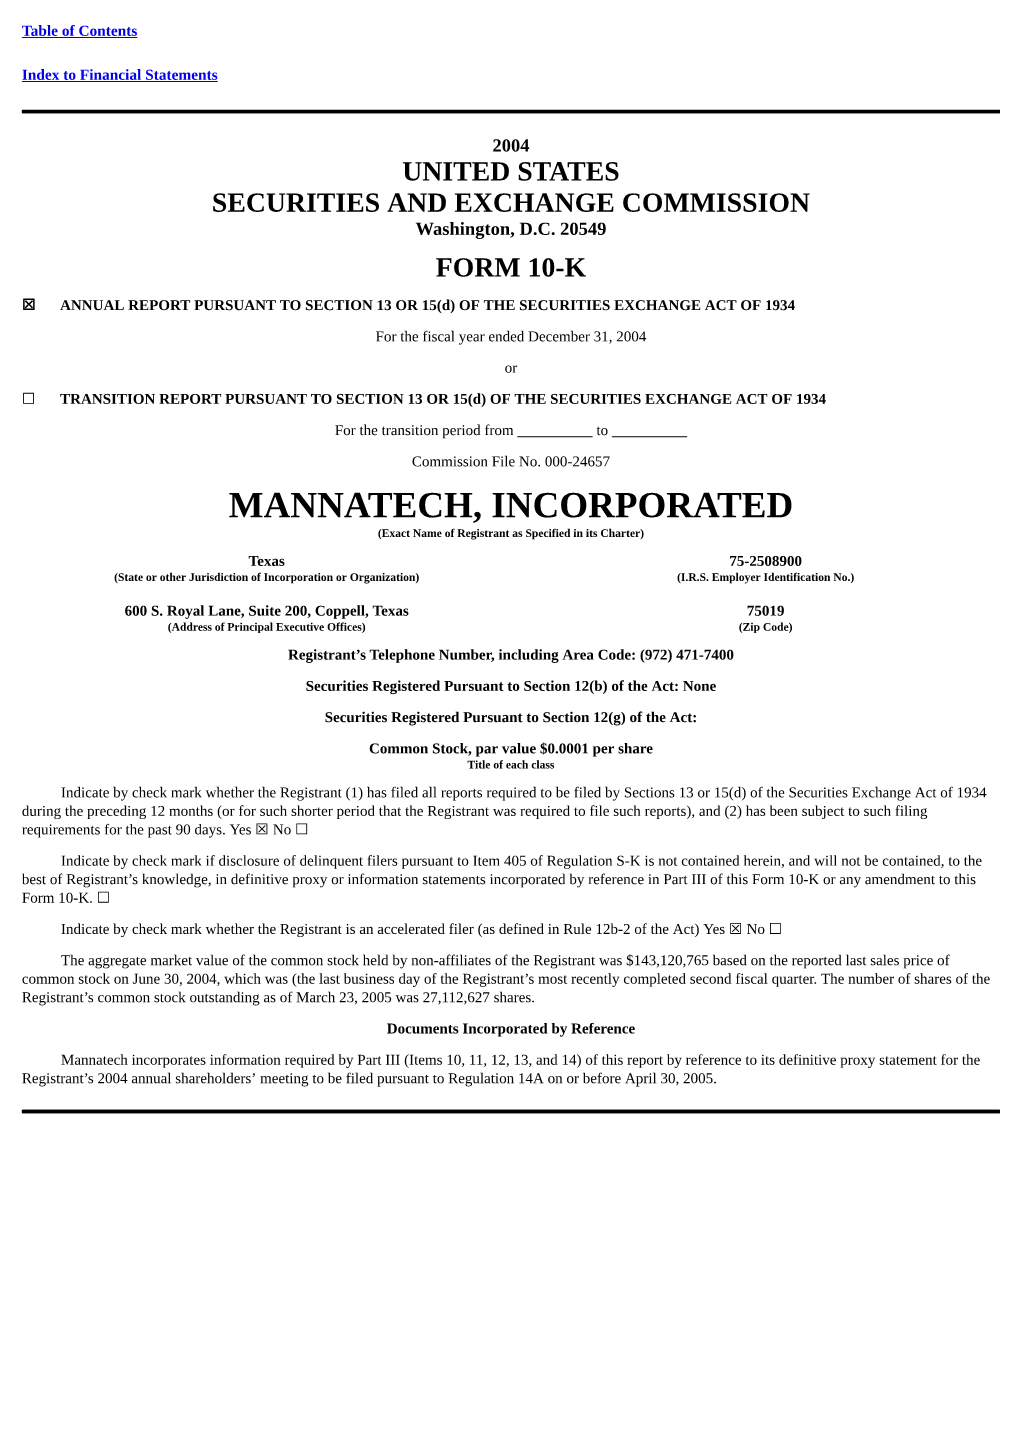 MANNATECH, INCORPORATED (Exact Name of Registrant As Specified in Its Charter)